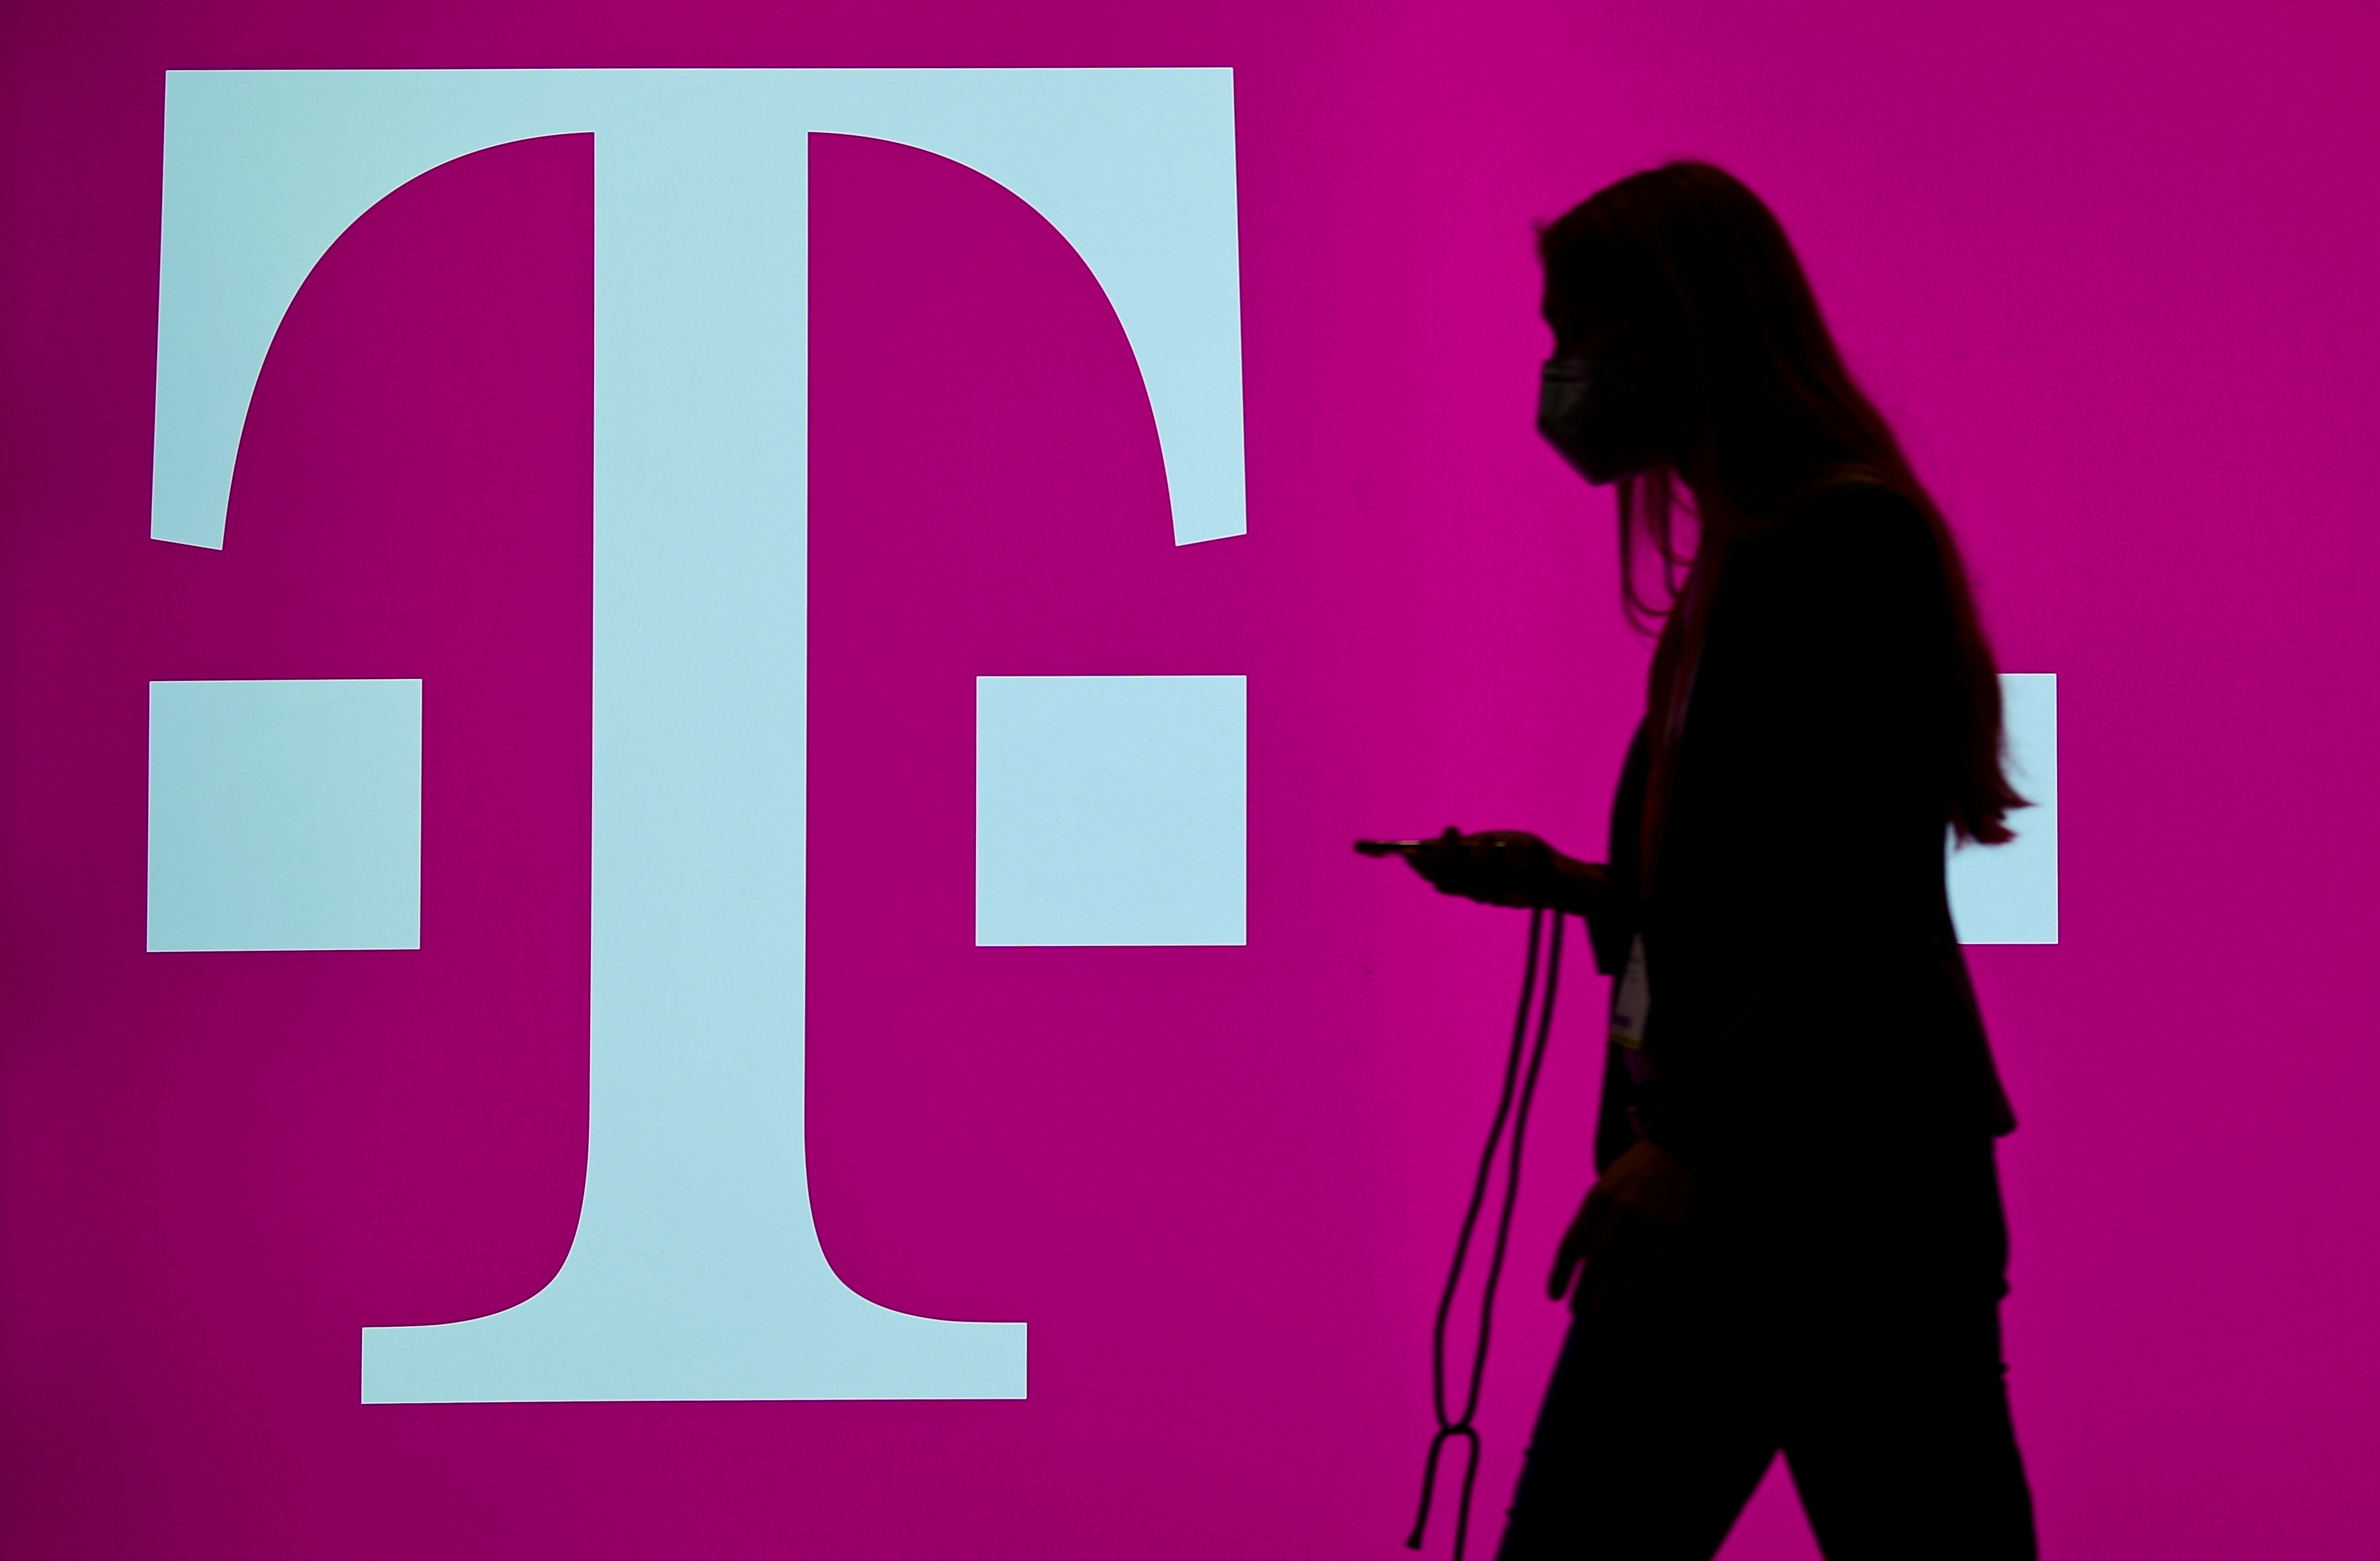 A woman carrying her phone passes by the logo of German telecommunication company 